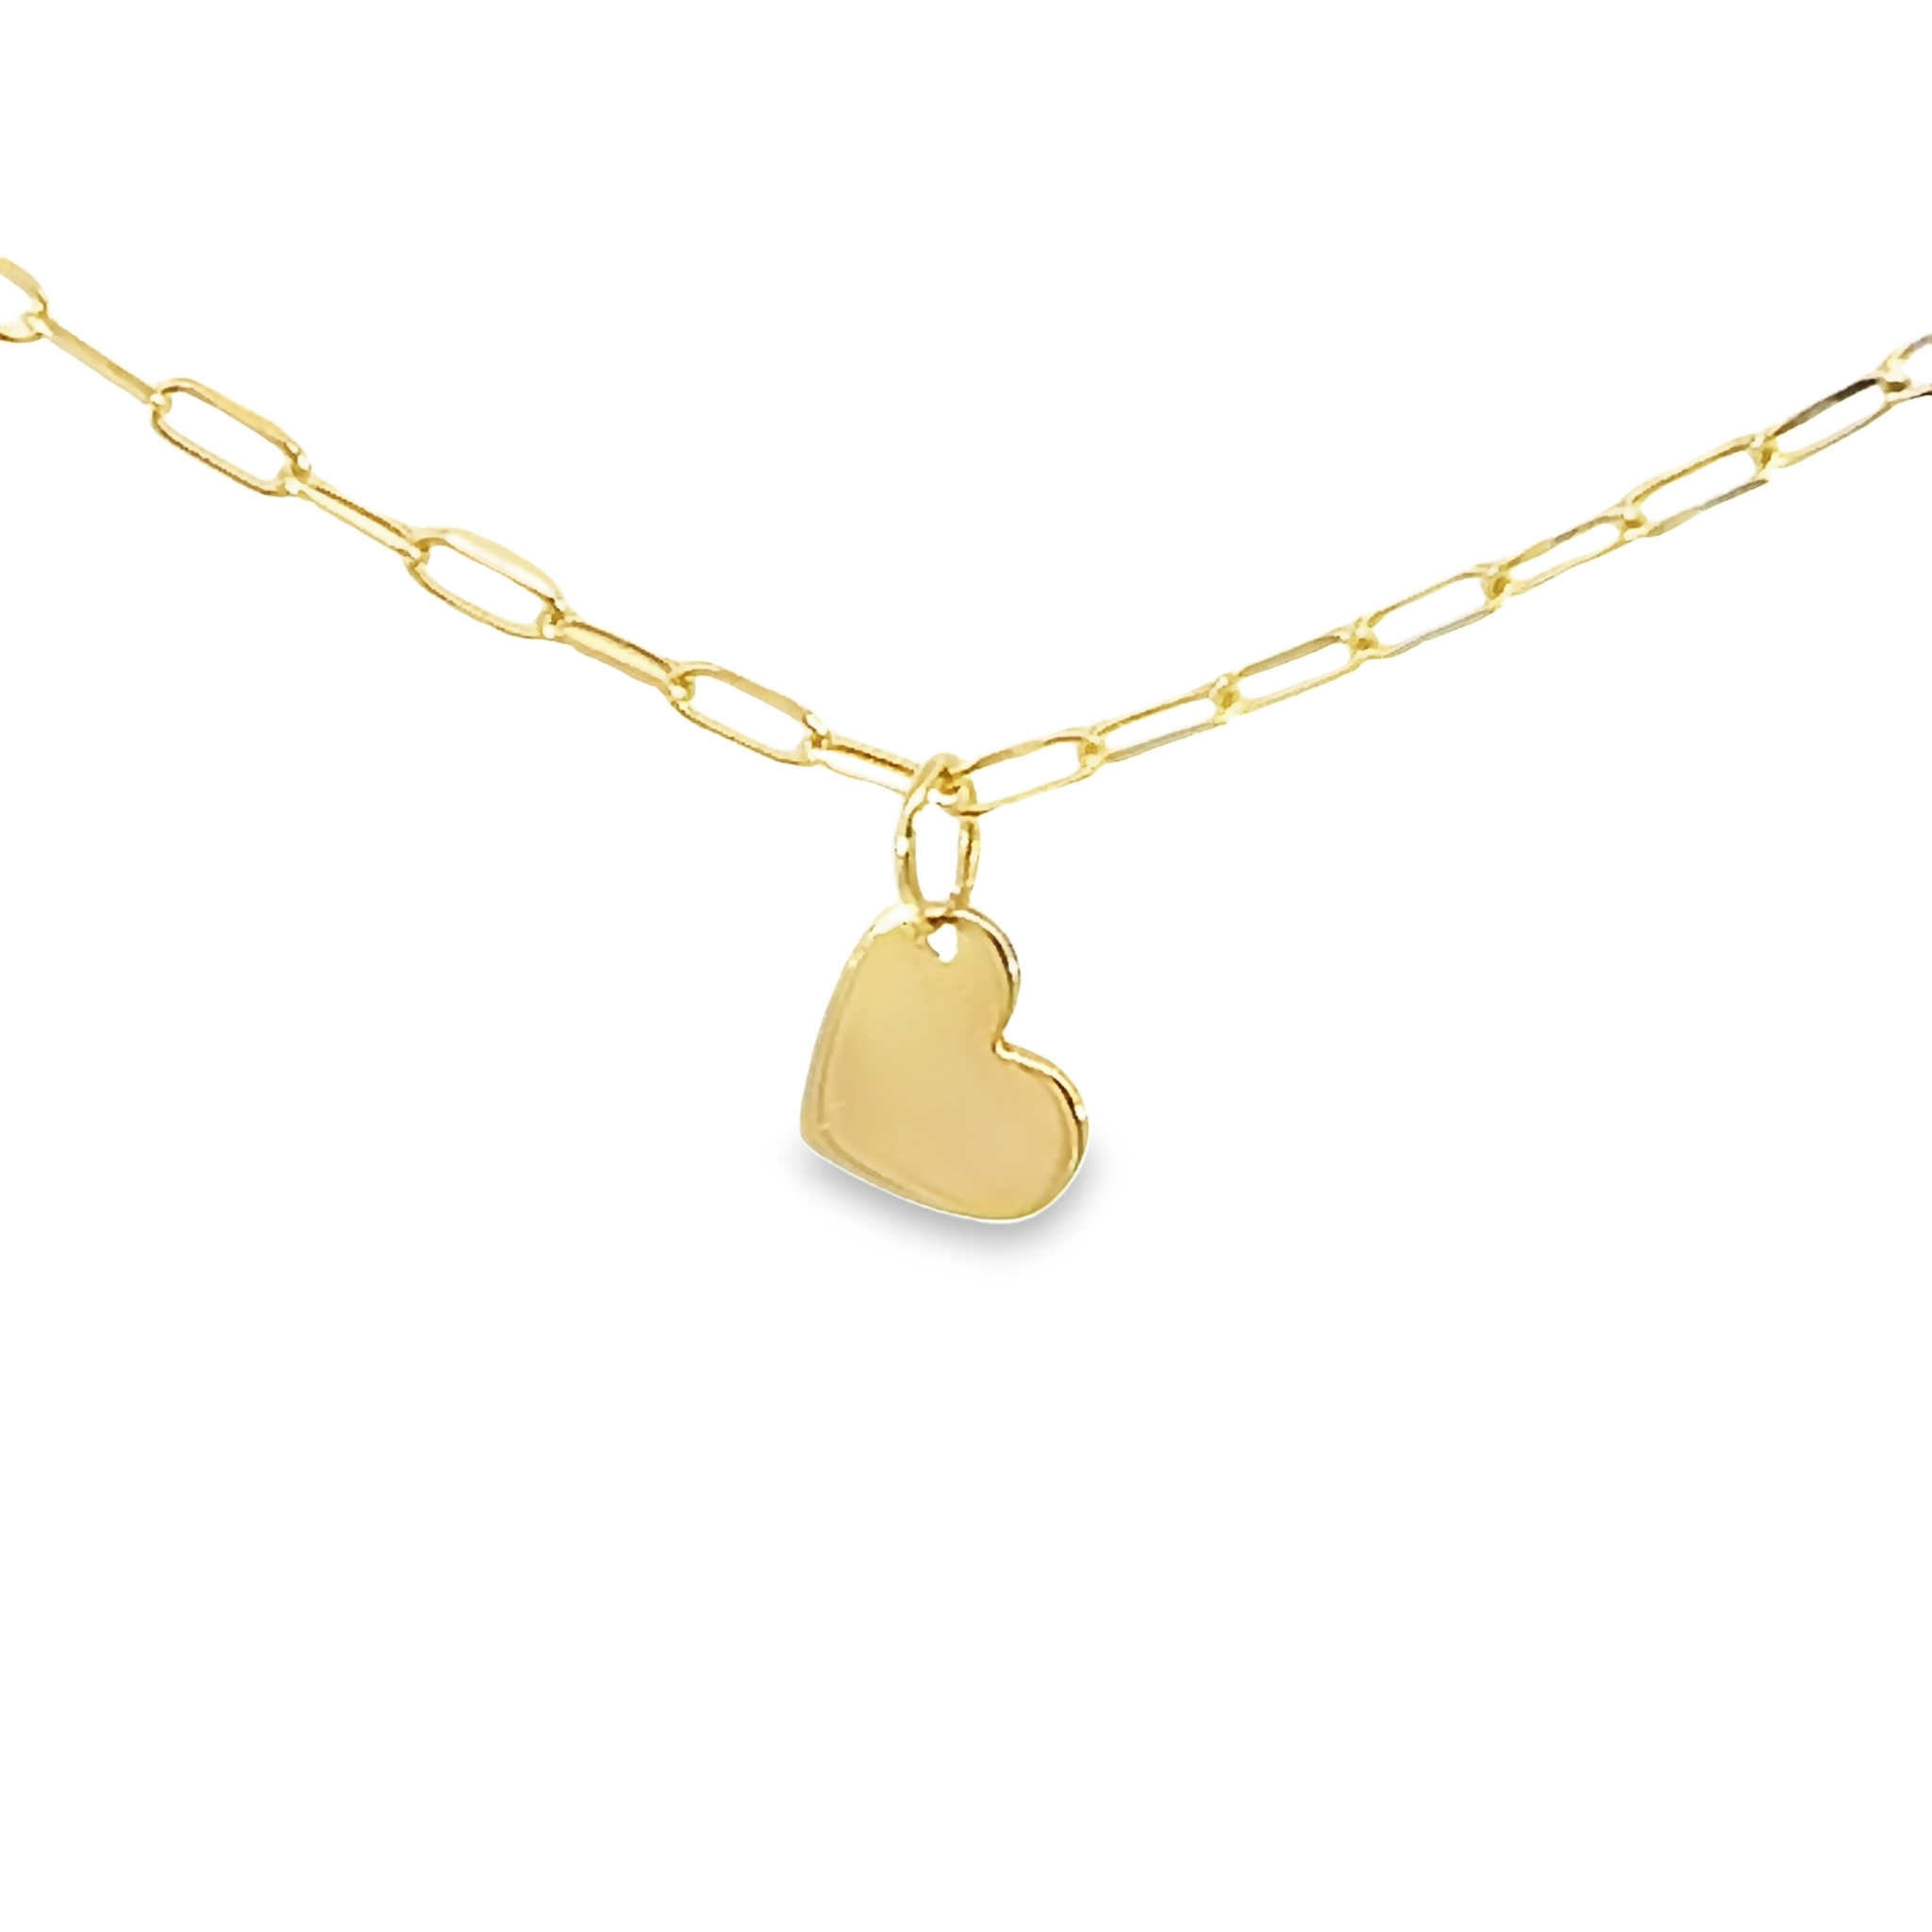 14 karat yellow gold paperclip chain with heart charm.